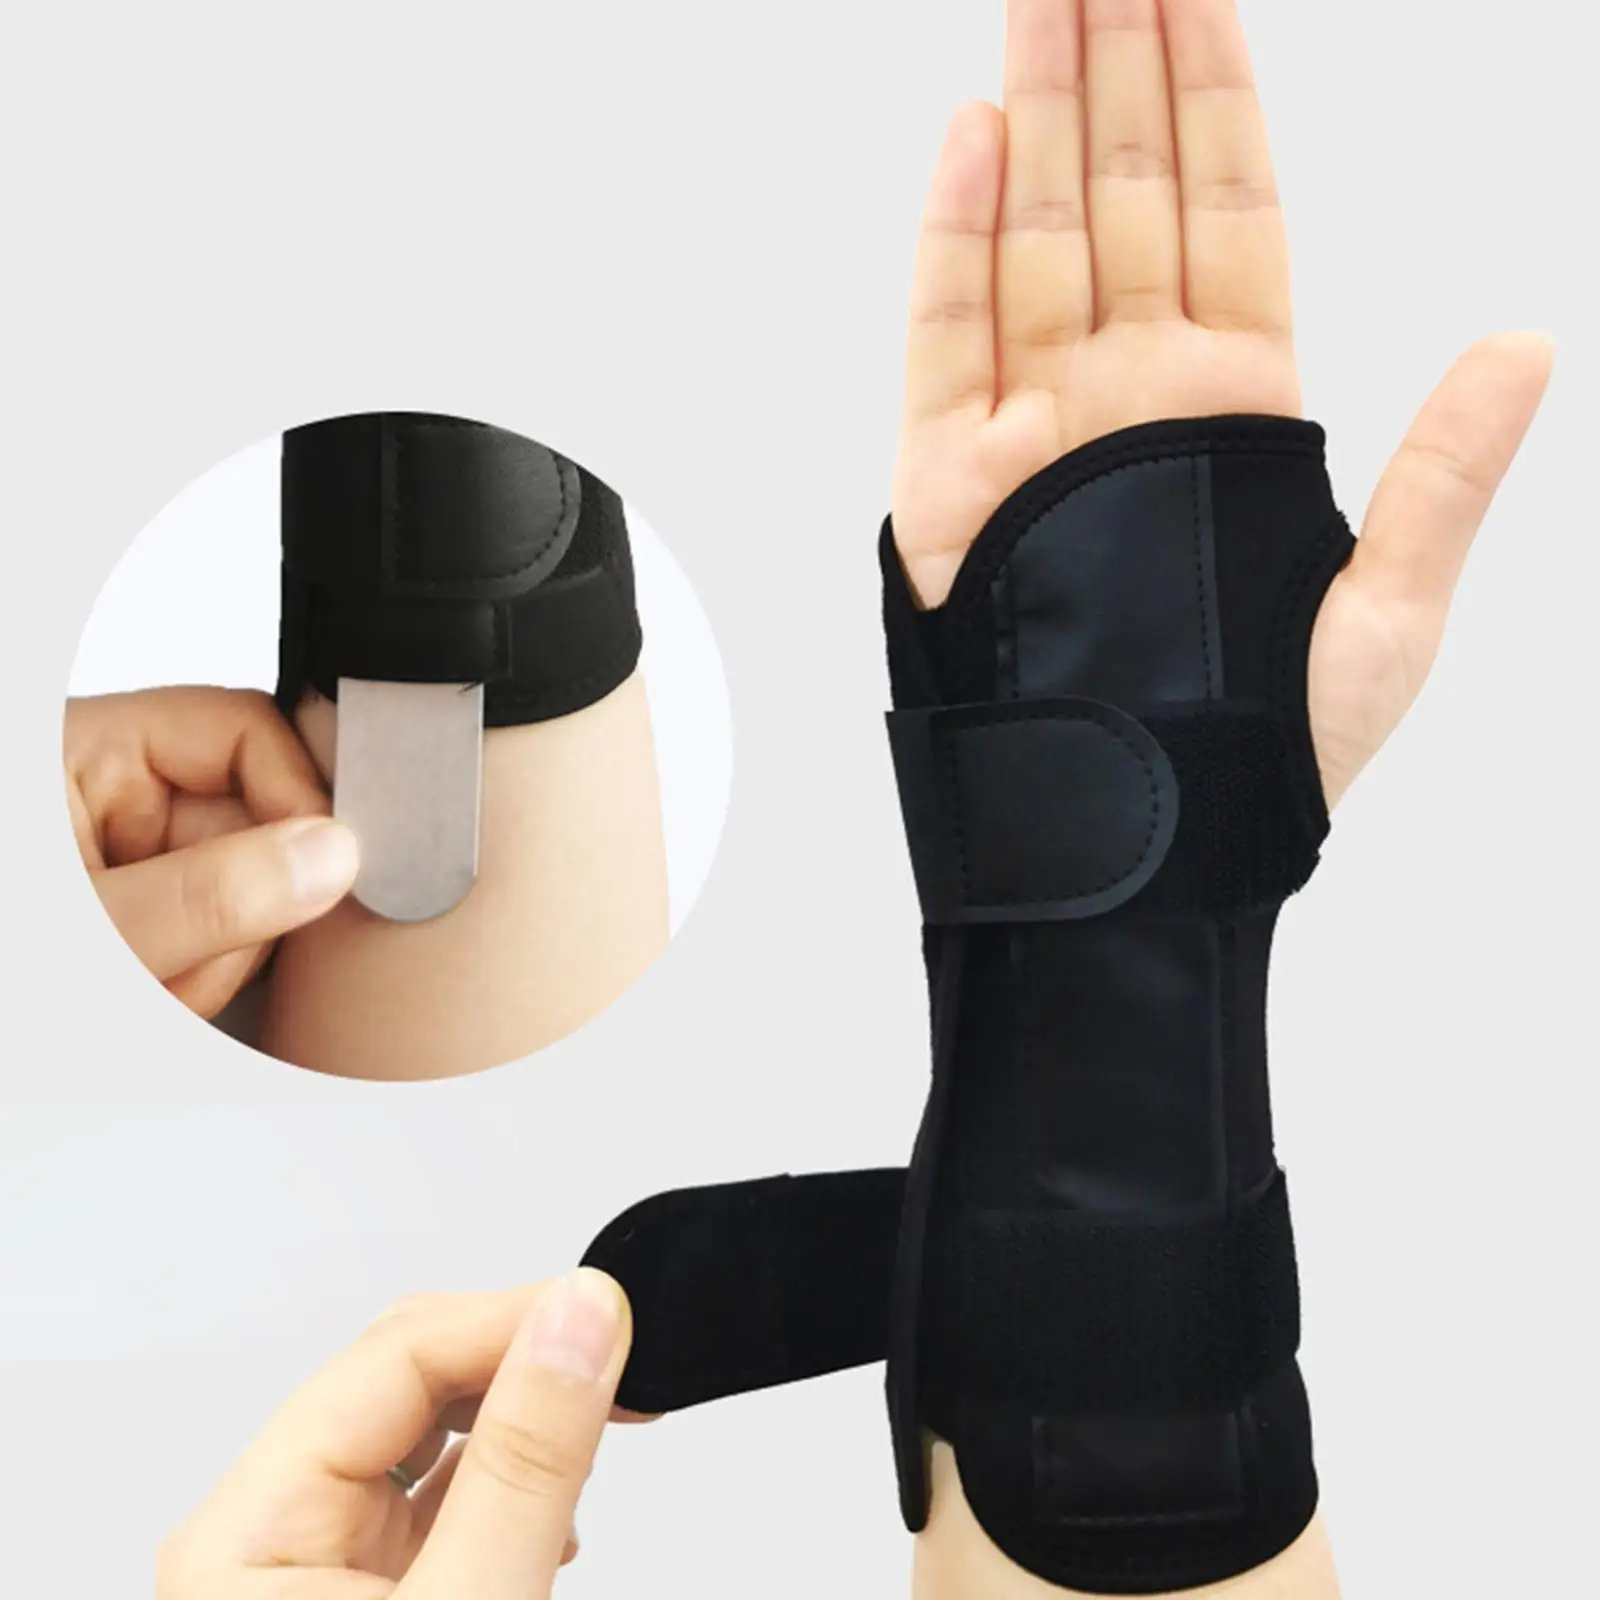 Wrist Brace Carpal Tunnel Detachable Protective Steel Plate Wrist Wraps Protect and Stabilize Wrist Guard for Weight Lifting